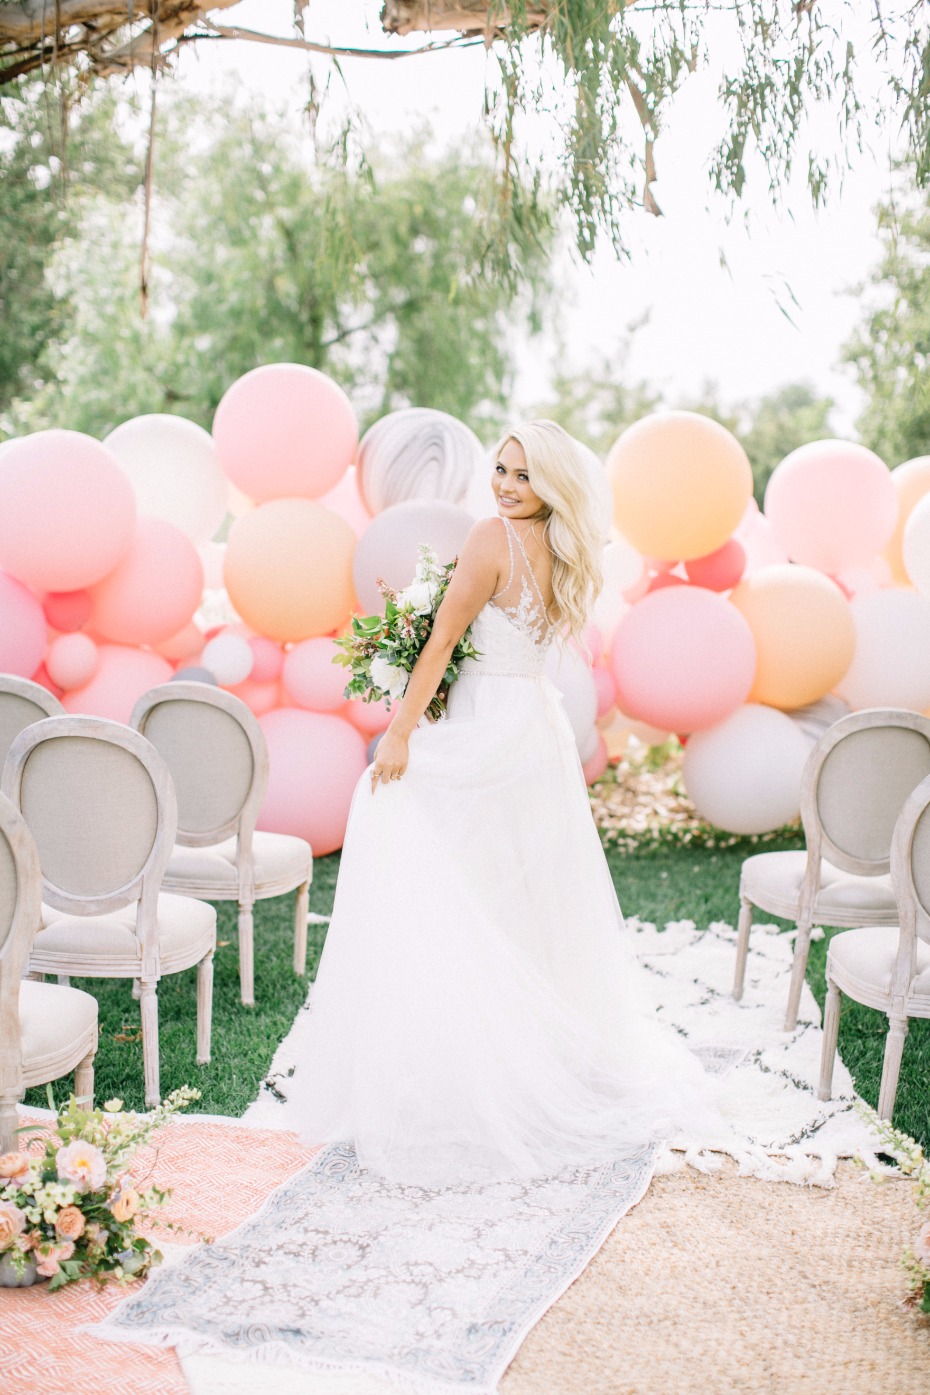 Gorgeous ceremony with balloon backdrop